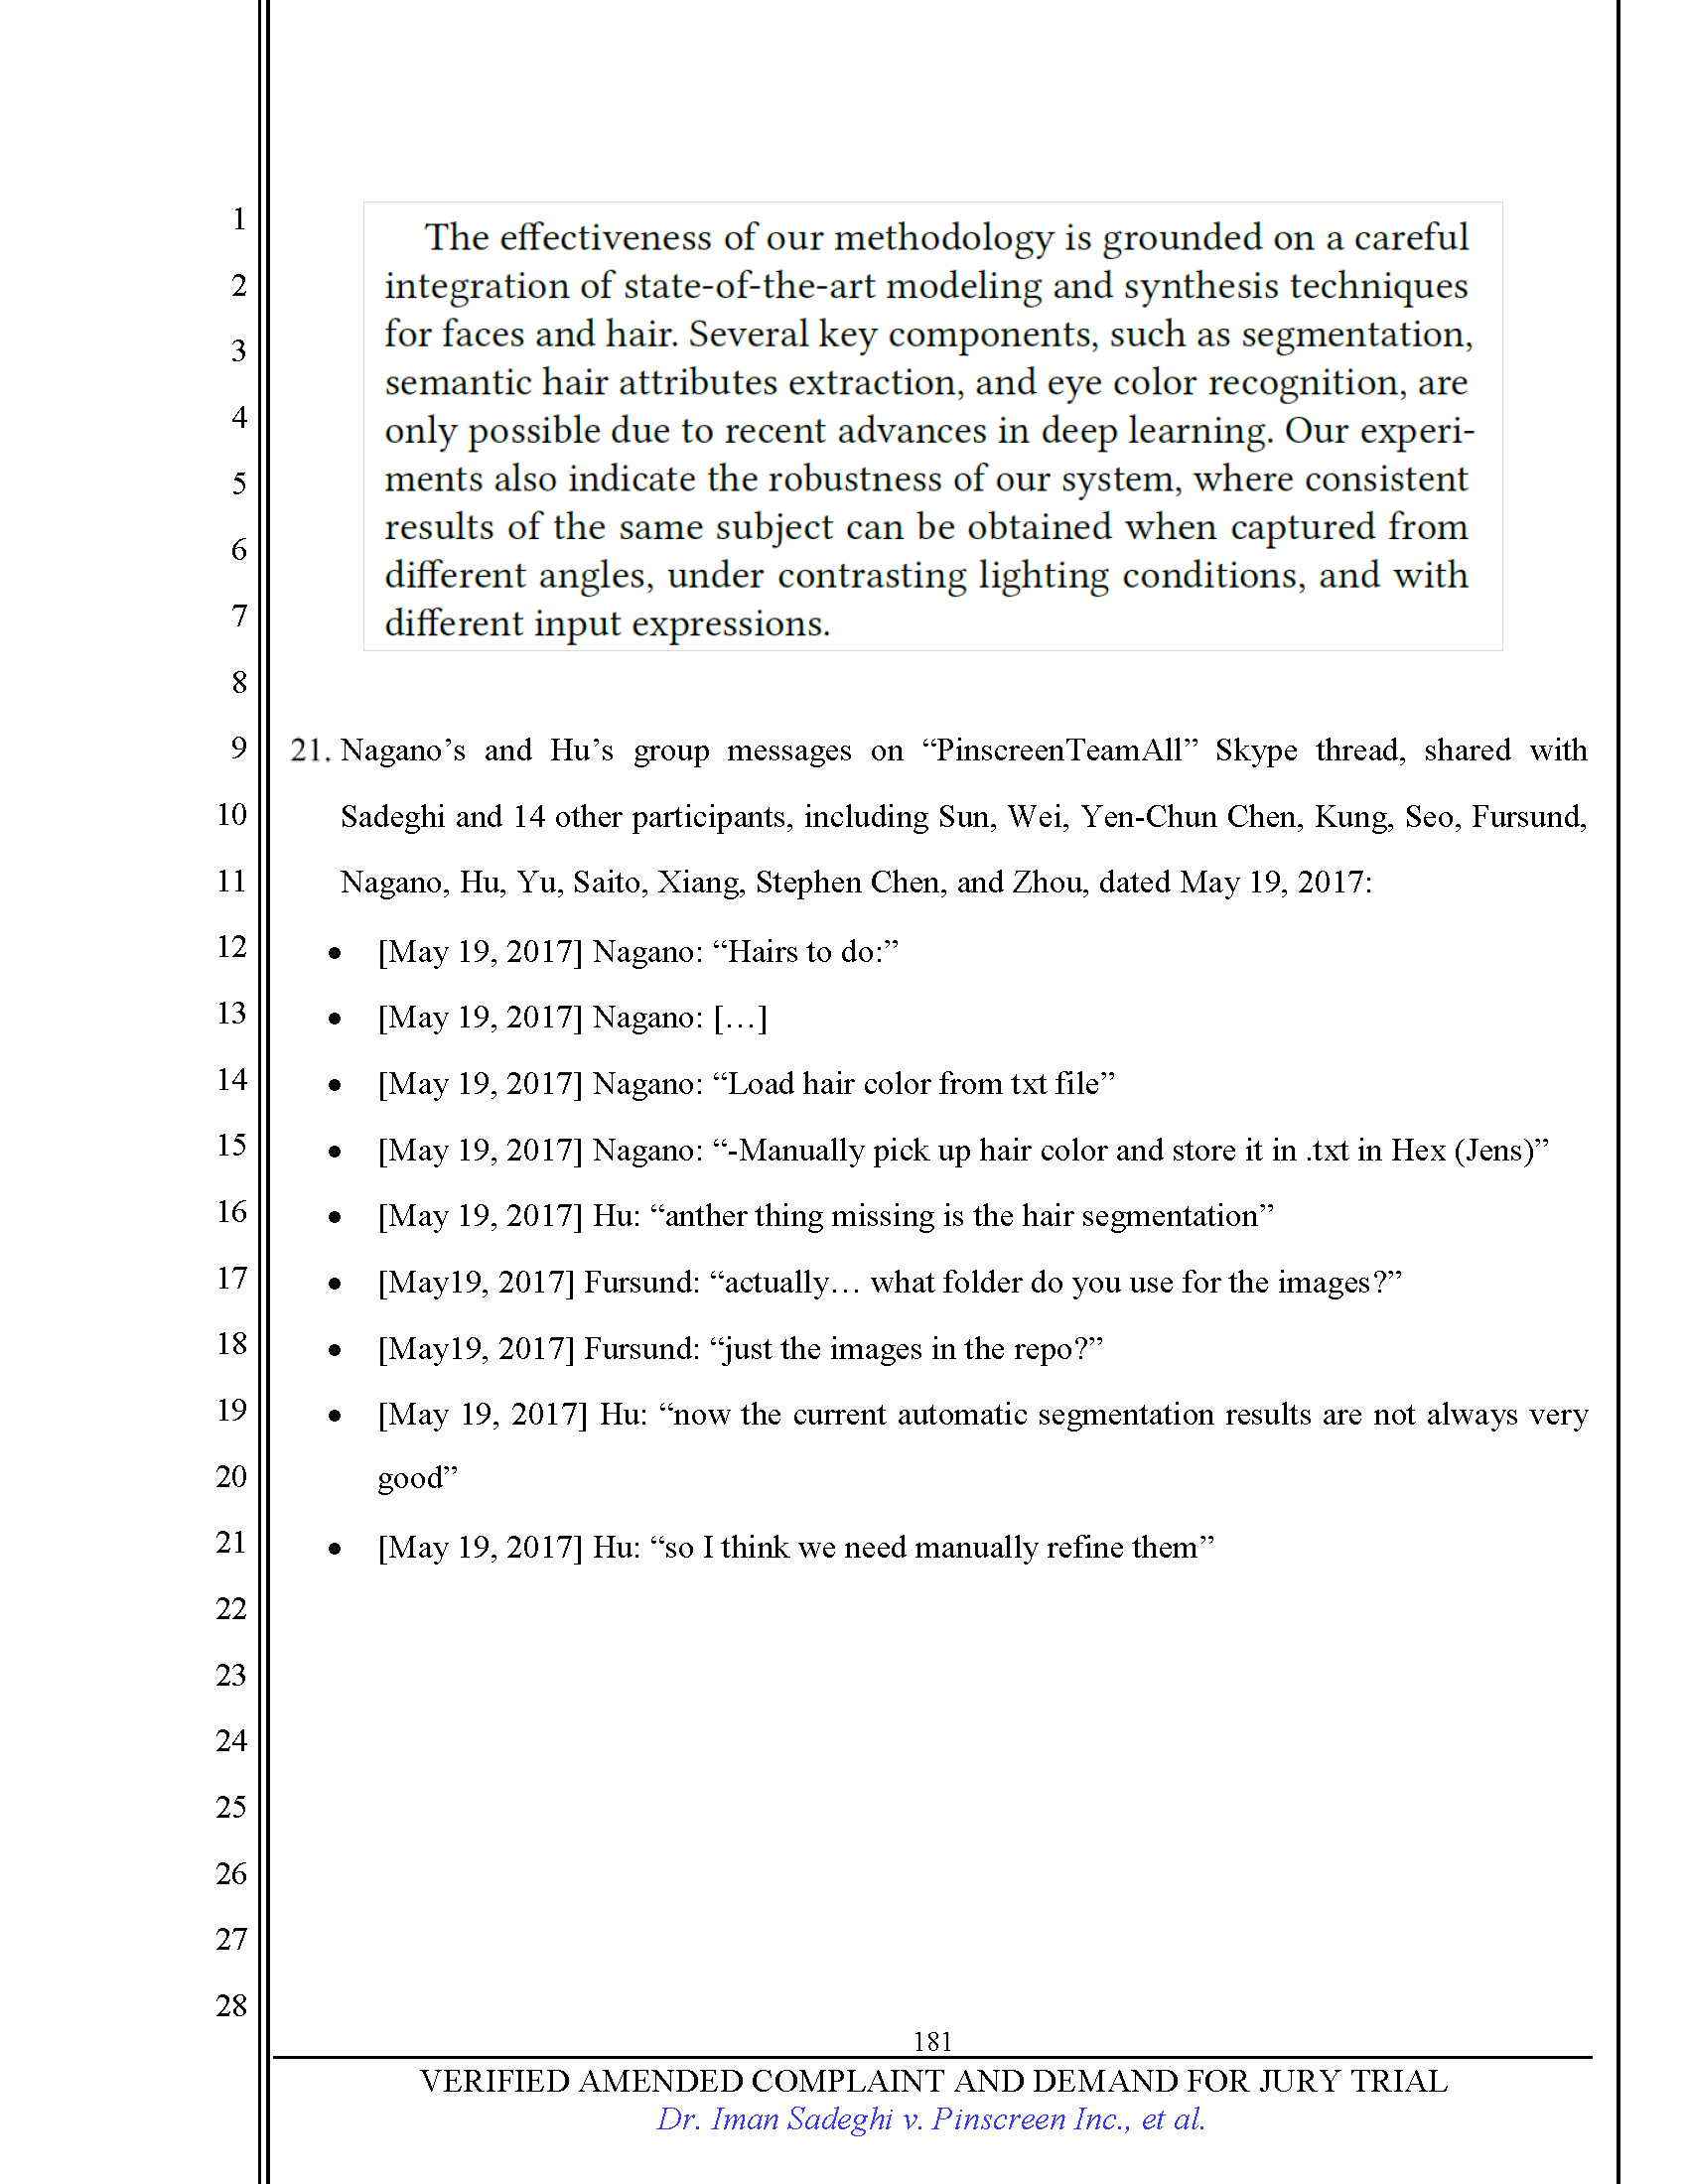 First Amended Complaint (FAC) Page 181